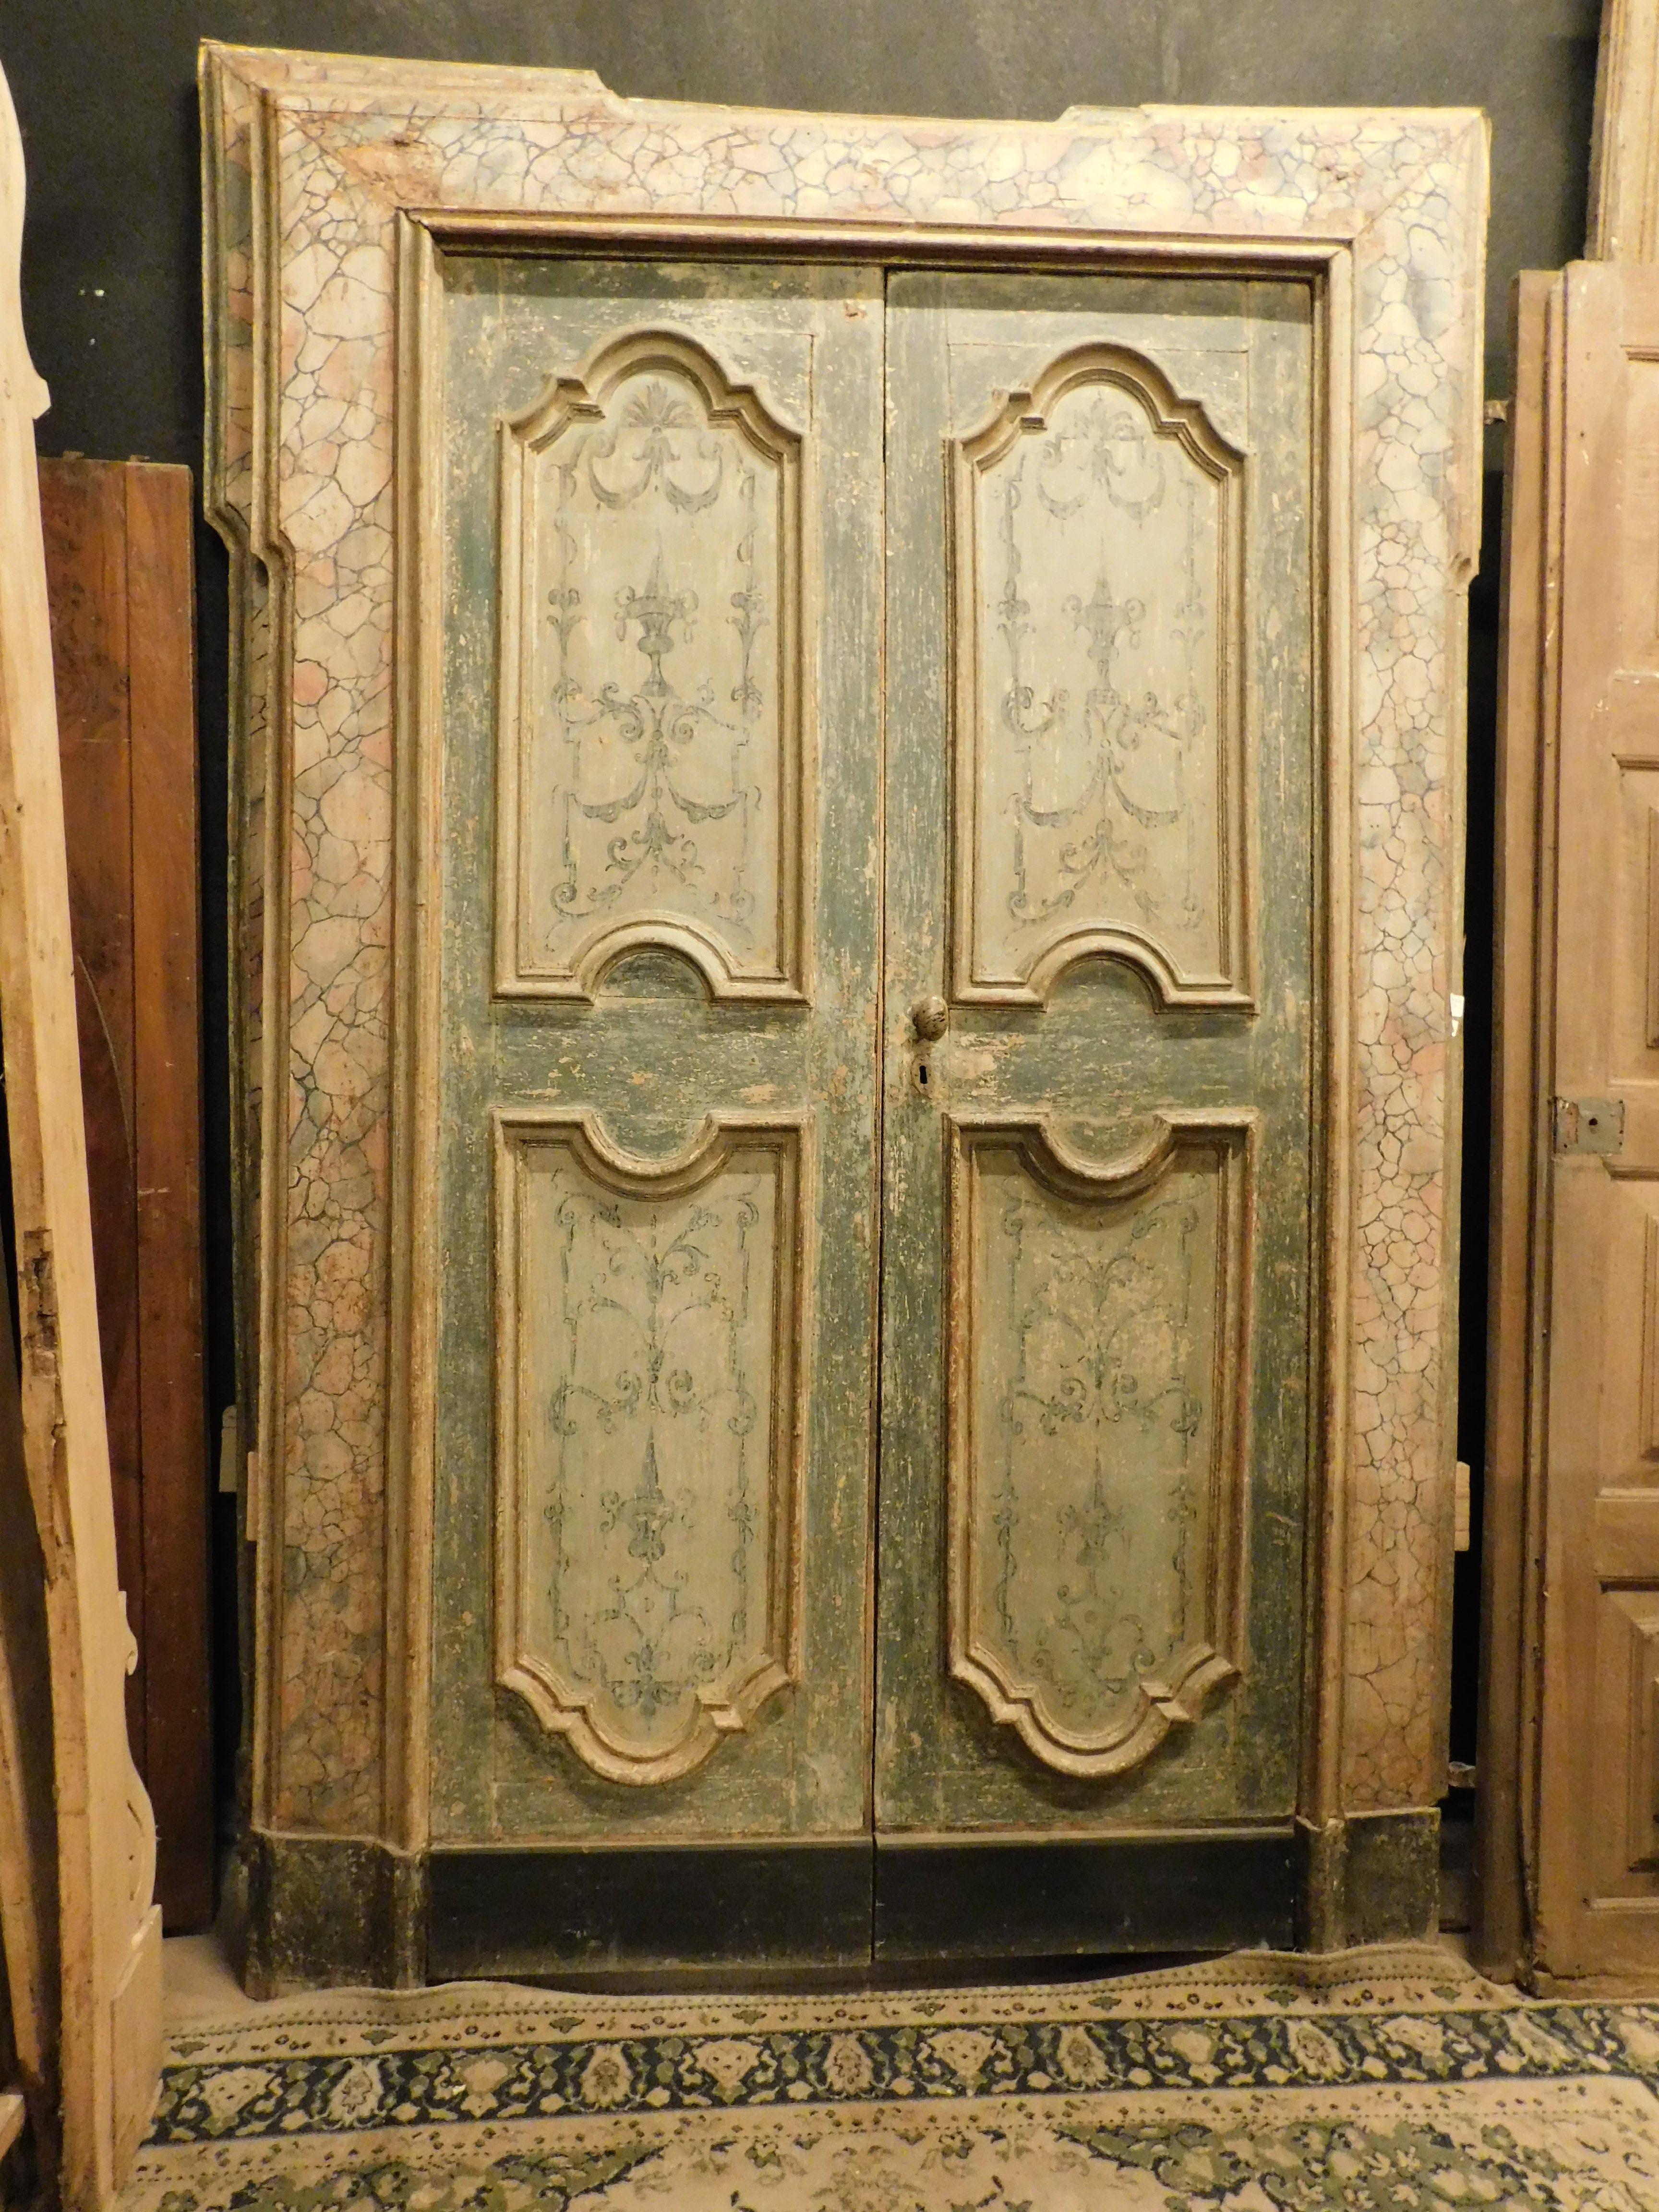 Set of 2 antique interior doors, complete with 2 wings and frame, built in solid wood and lacquered, hand painted with very precious faux marble texture, built in sets for a noble house in the 18th century, from Naples ( Italy), ideal if placed